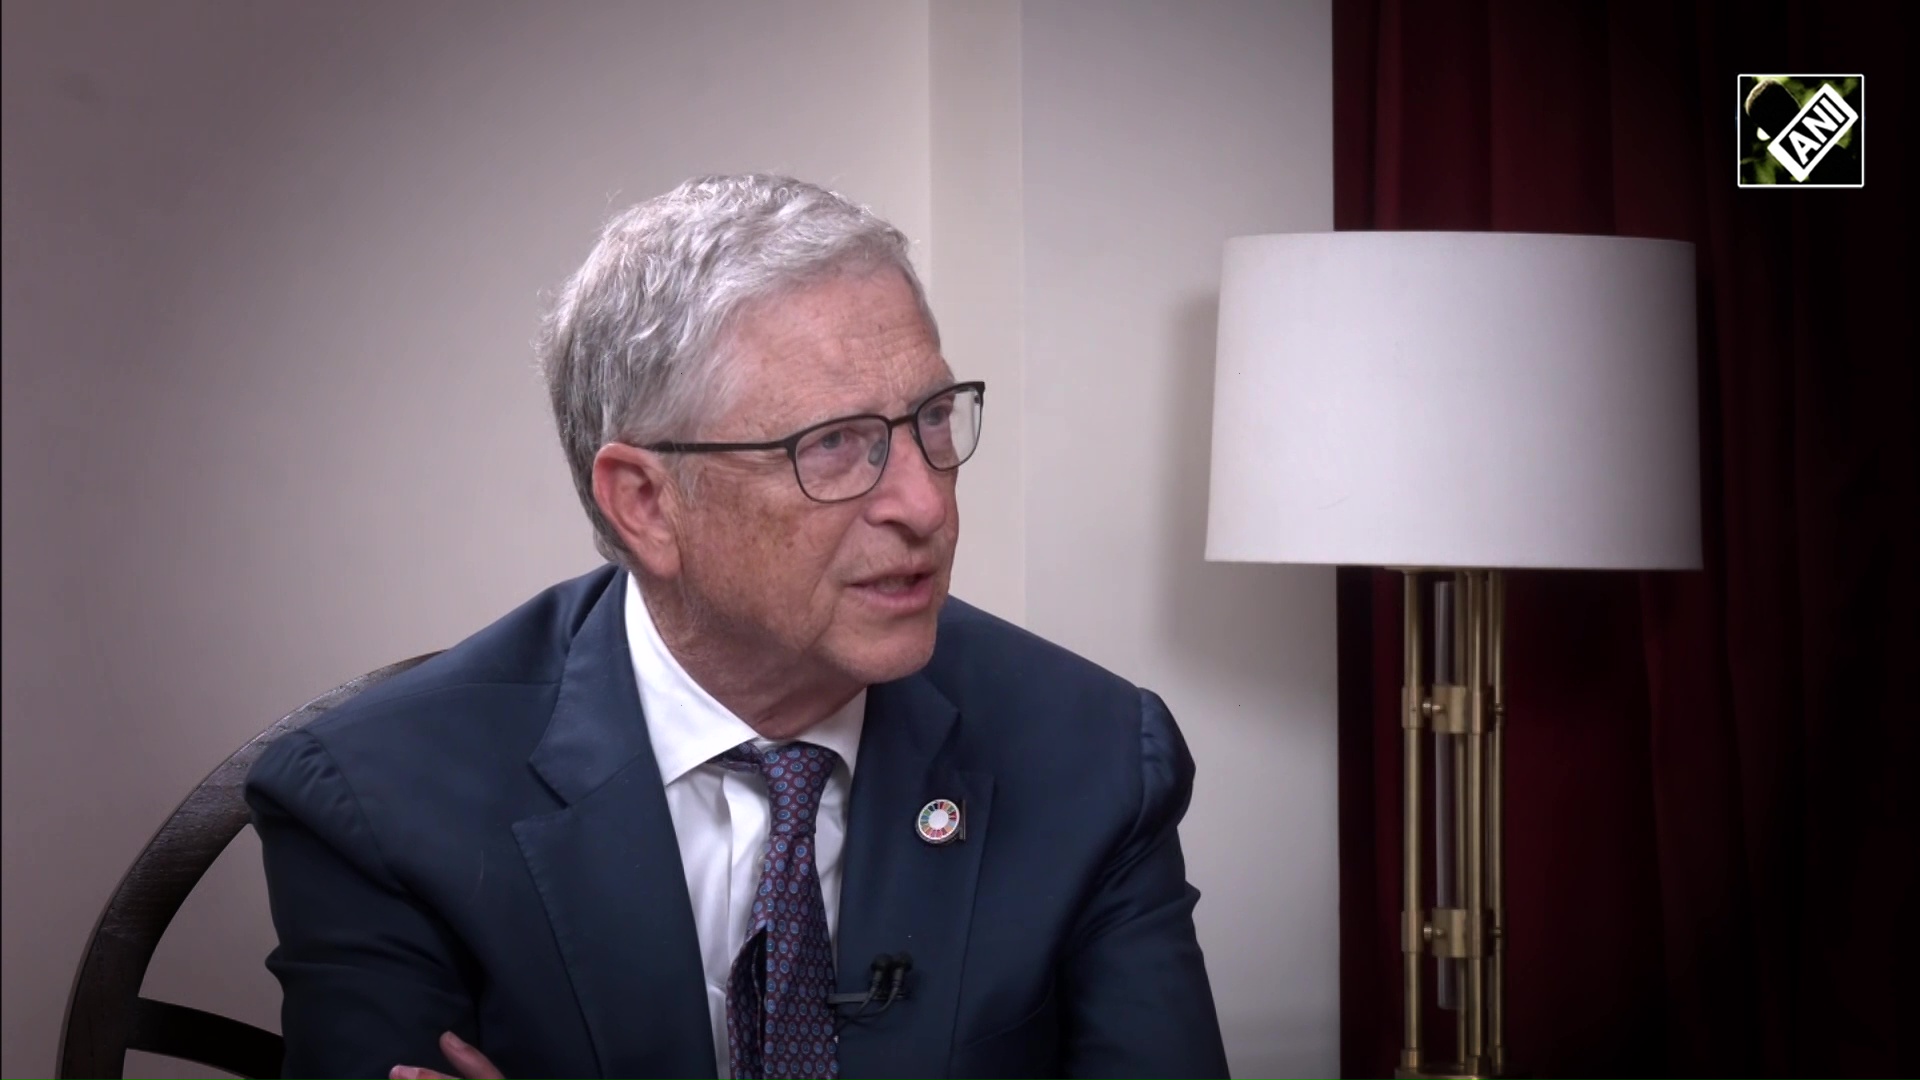 “Growth of Indian economy…” Bill Gates reveals his conversations with Warren Buffet on India